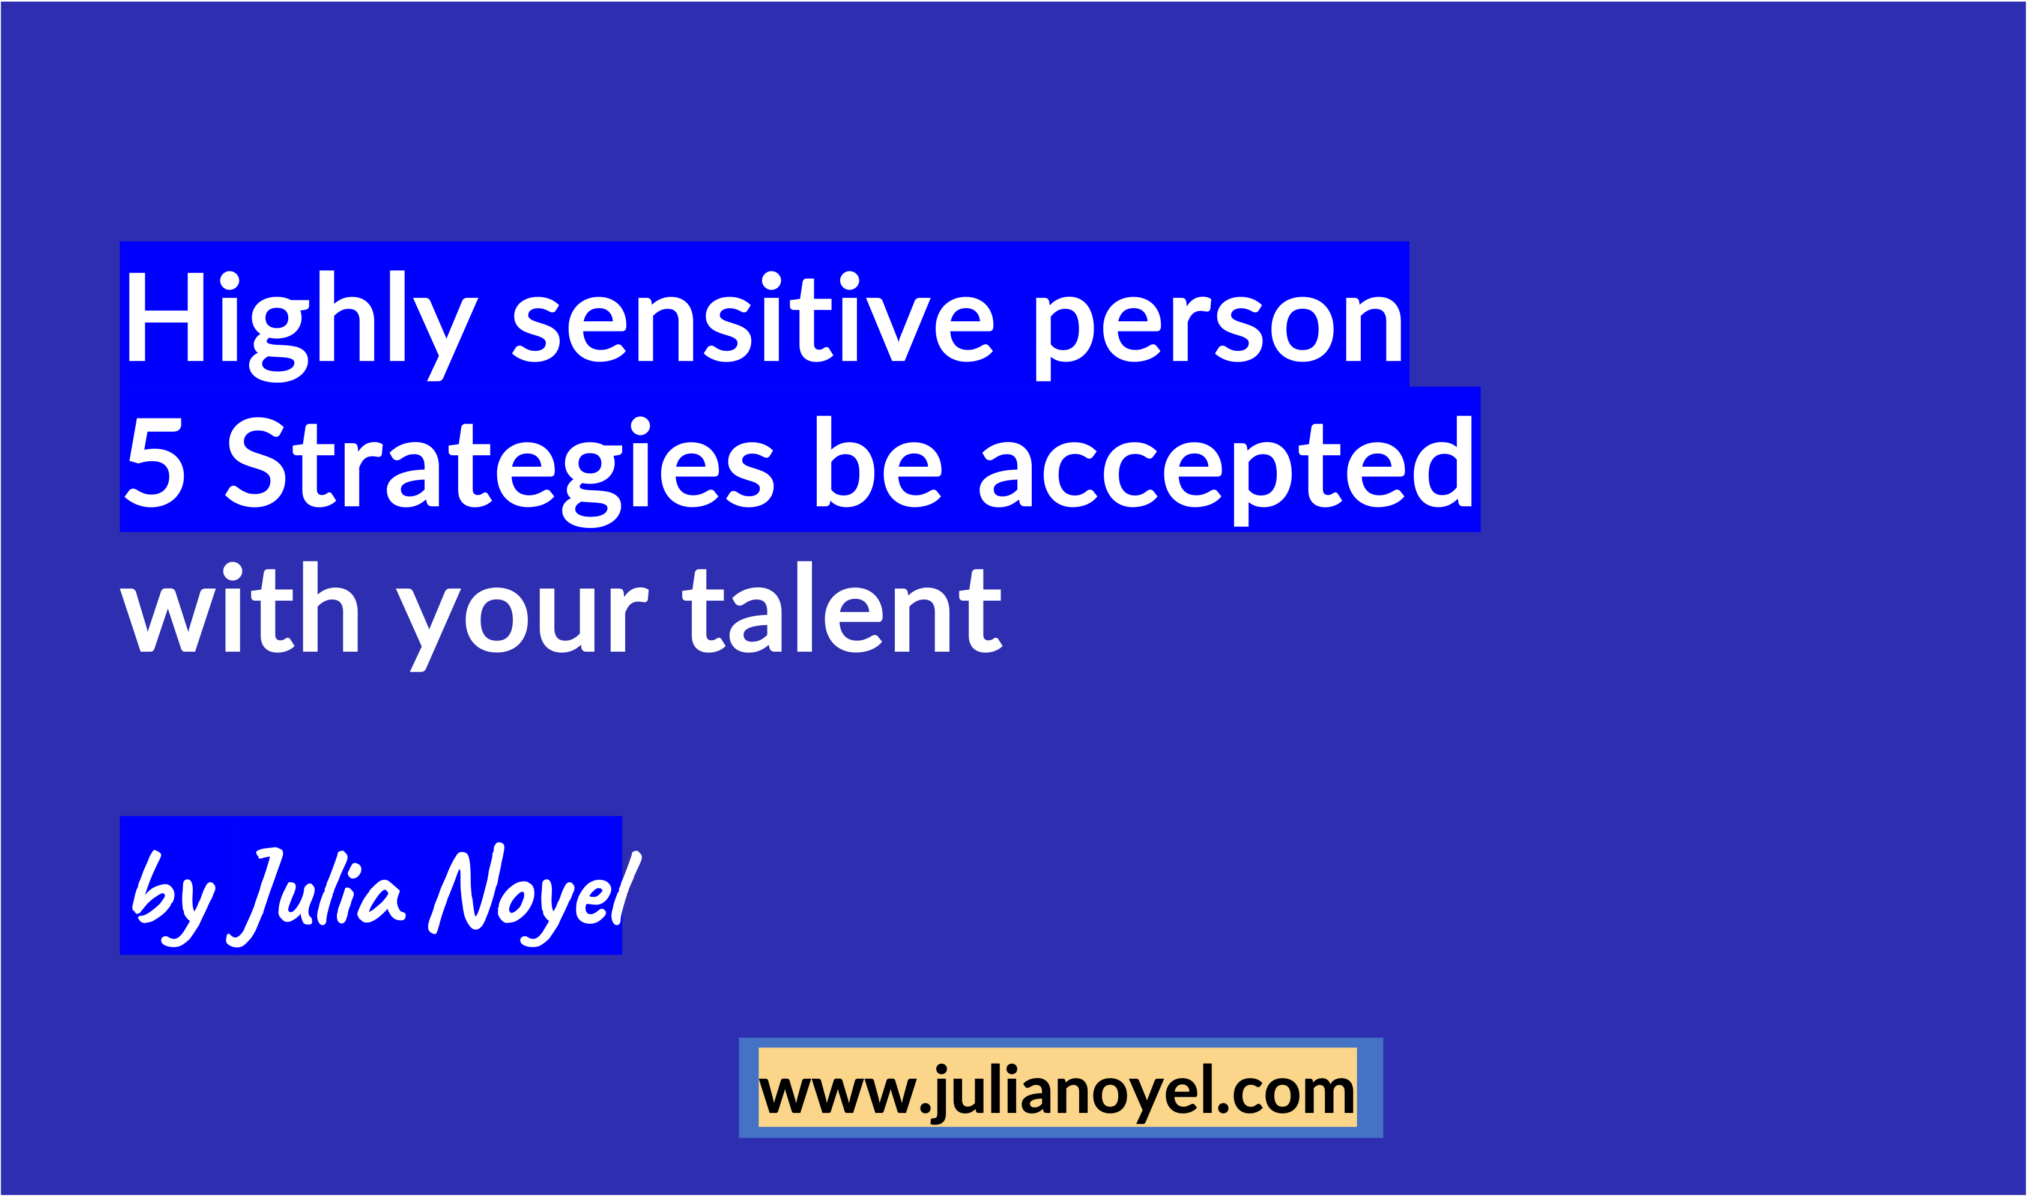 Highly sensitive person 5 Strategies be accepted with your talent by Julia Noyel